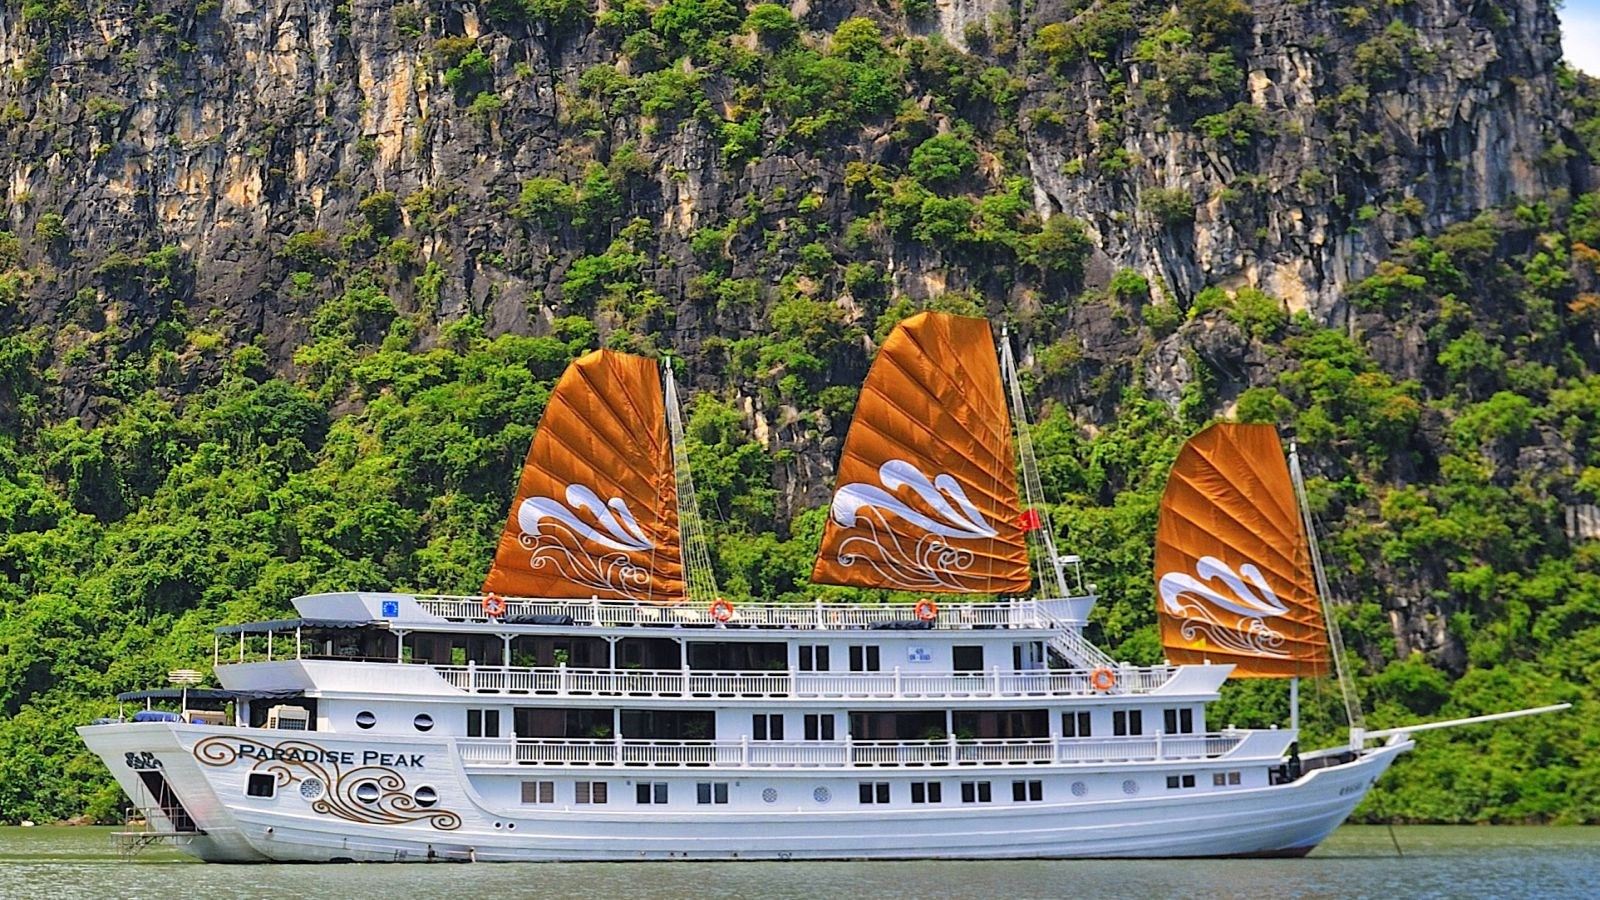 Things You Should Know Before Traveling with Luxury Halong Bay Cruises